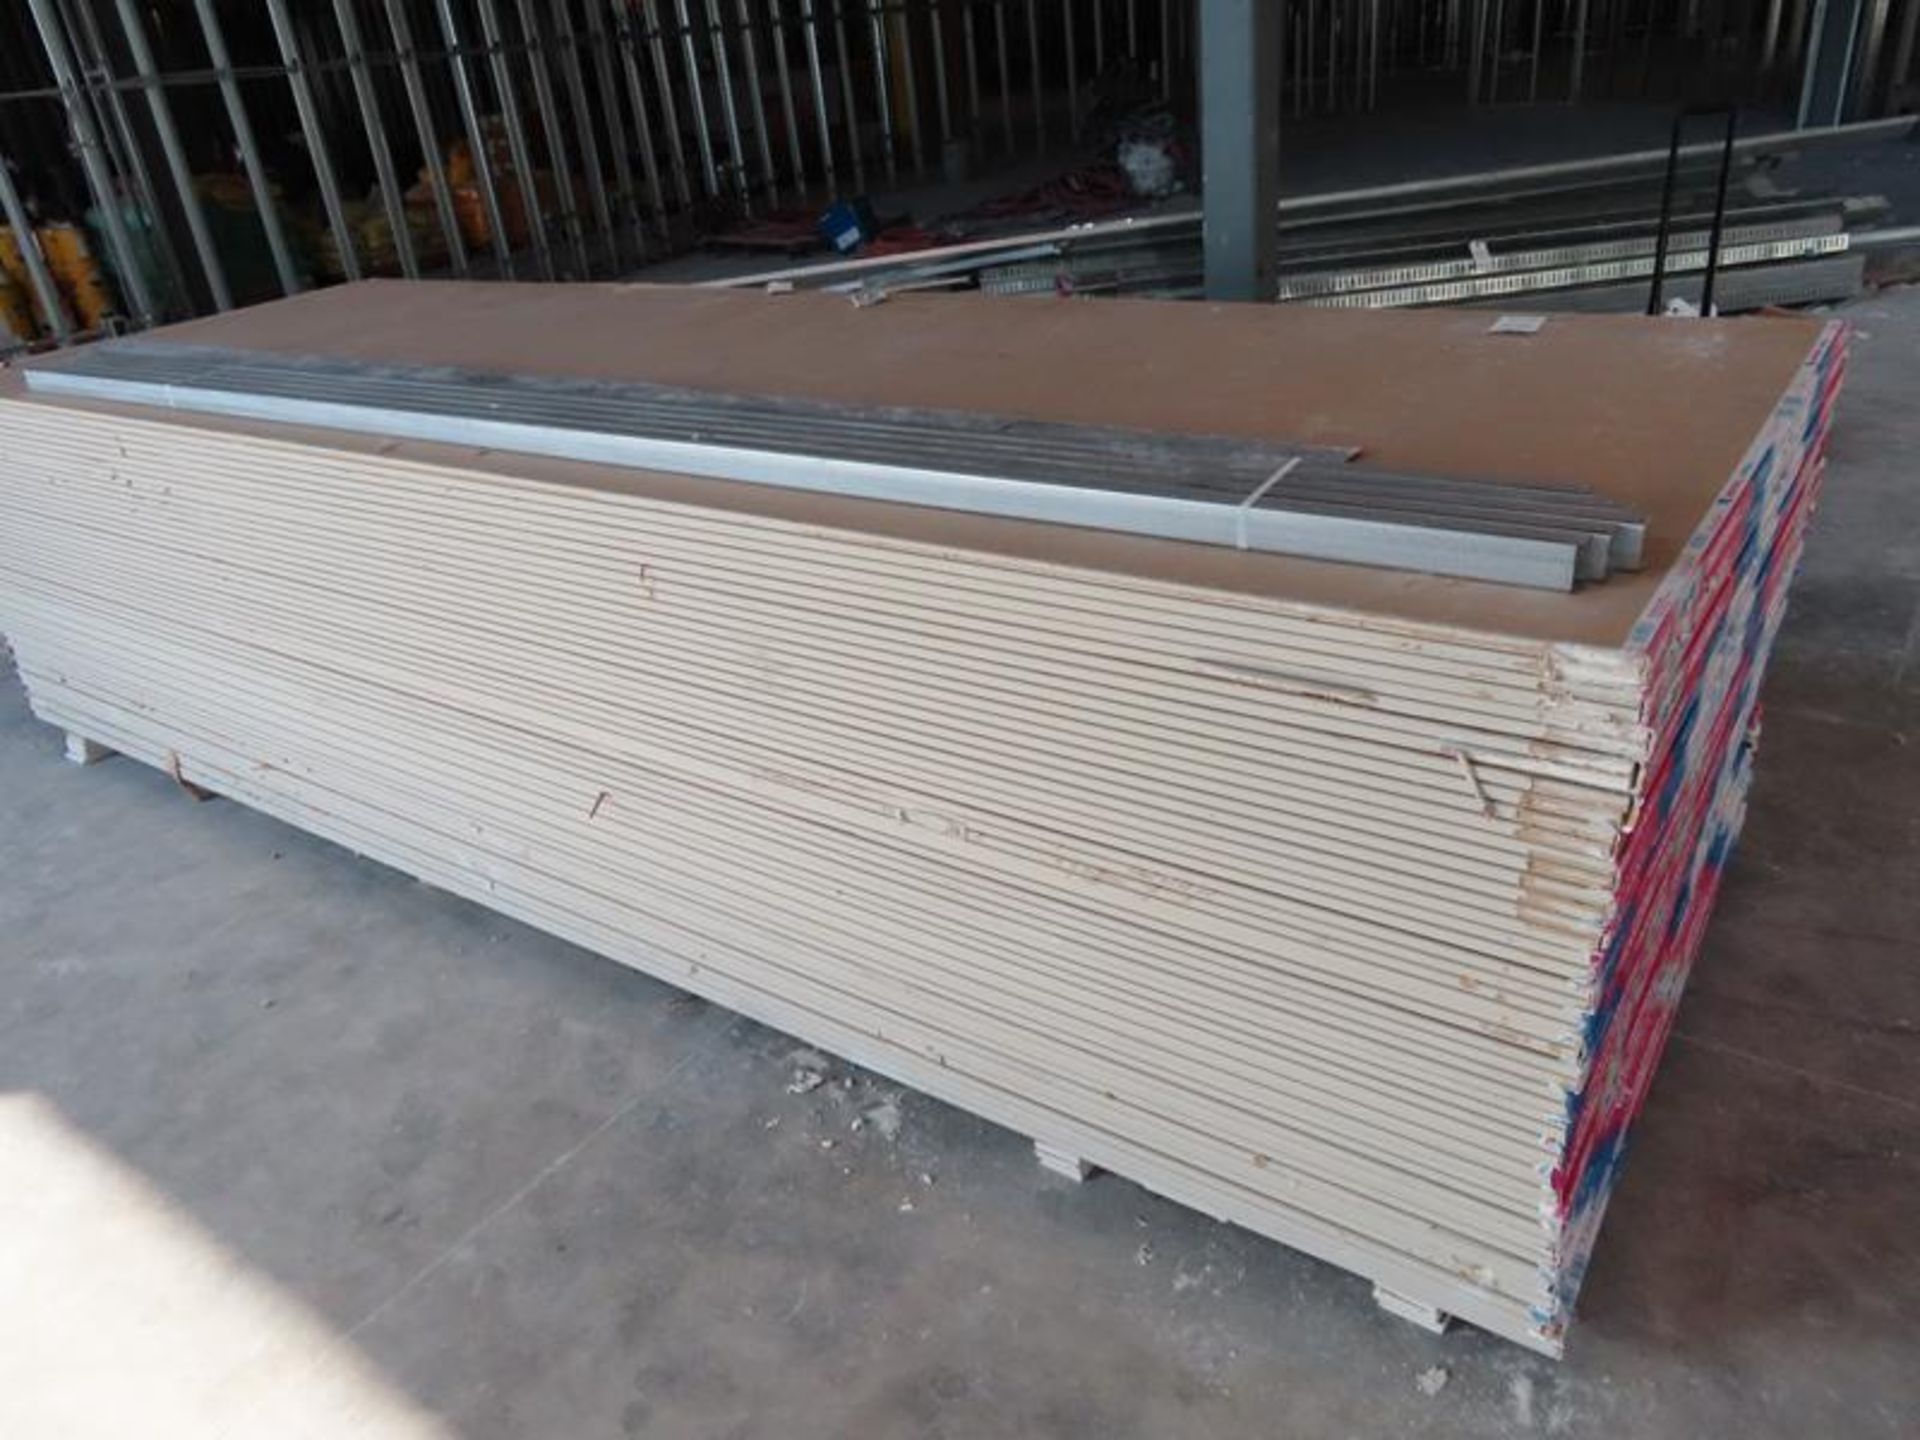 PALLET OF FIRECODE CORE TYPE X SHEETROCK, APPROXIMATELY 50 SHEETS - Image 4 of 4